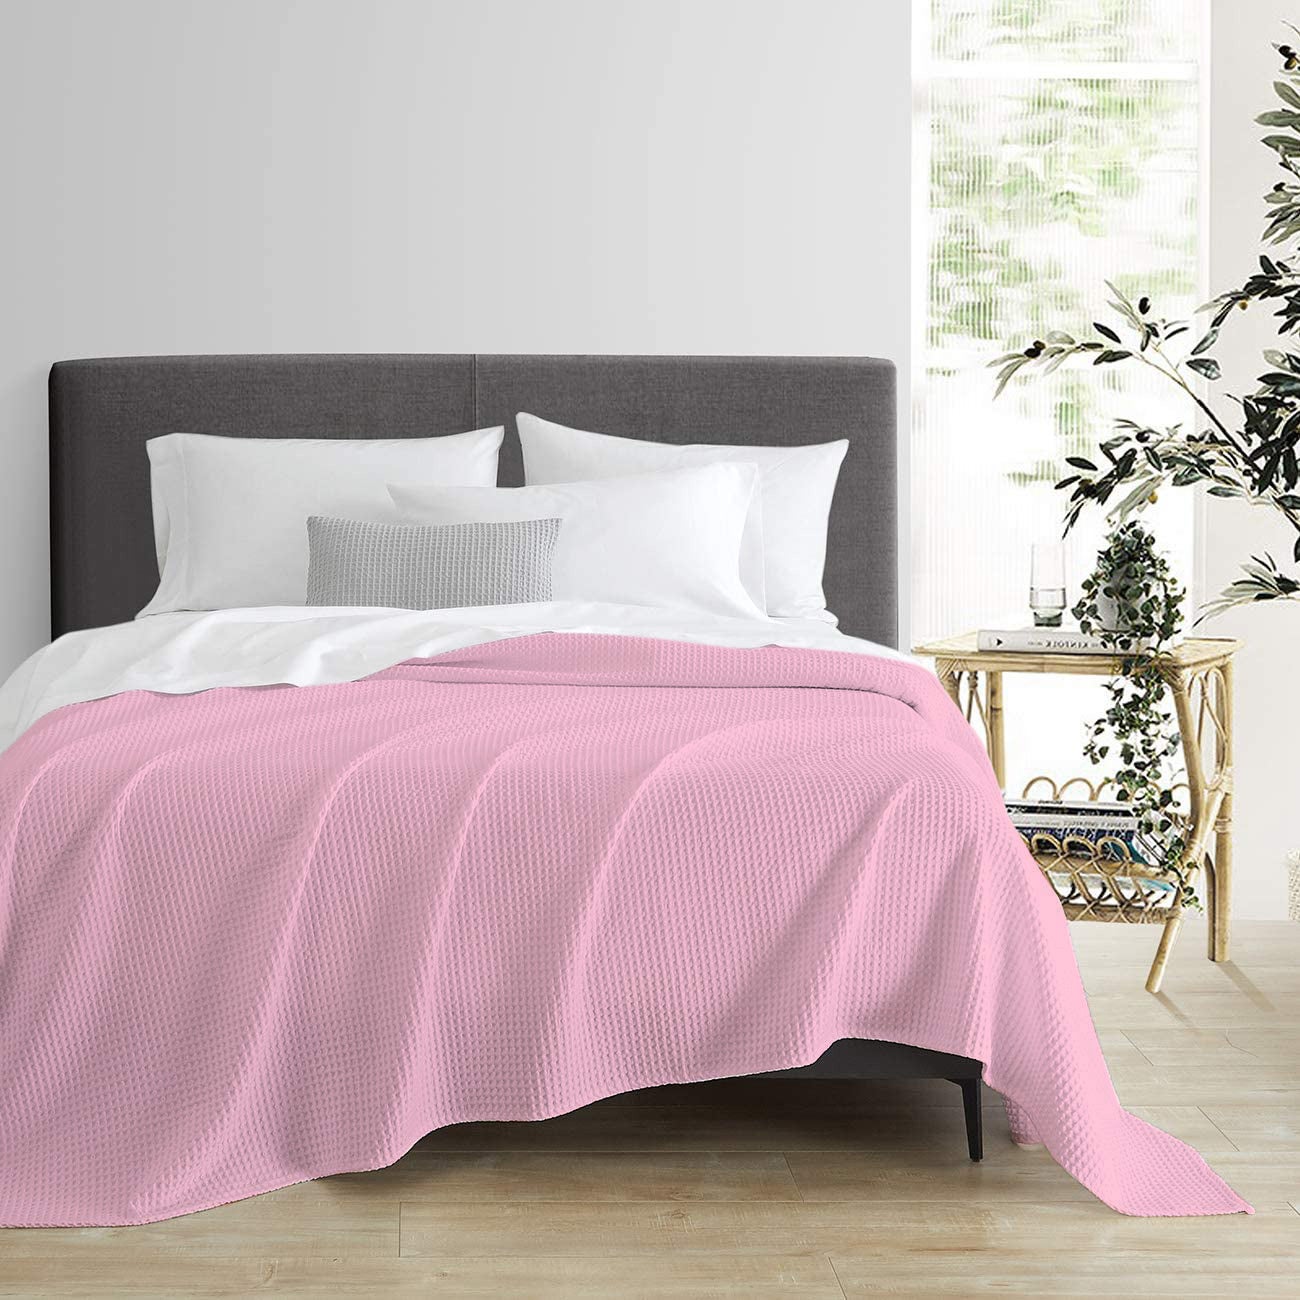 ULTRA-SOFT 100% EGYPTIAN COTTON SUMMER WEIGHT WAFFLE BLANKET PINK ALL BED SIZES